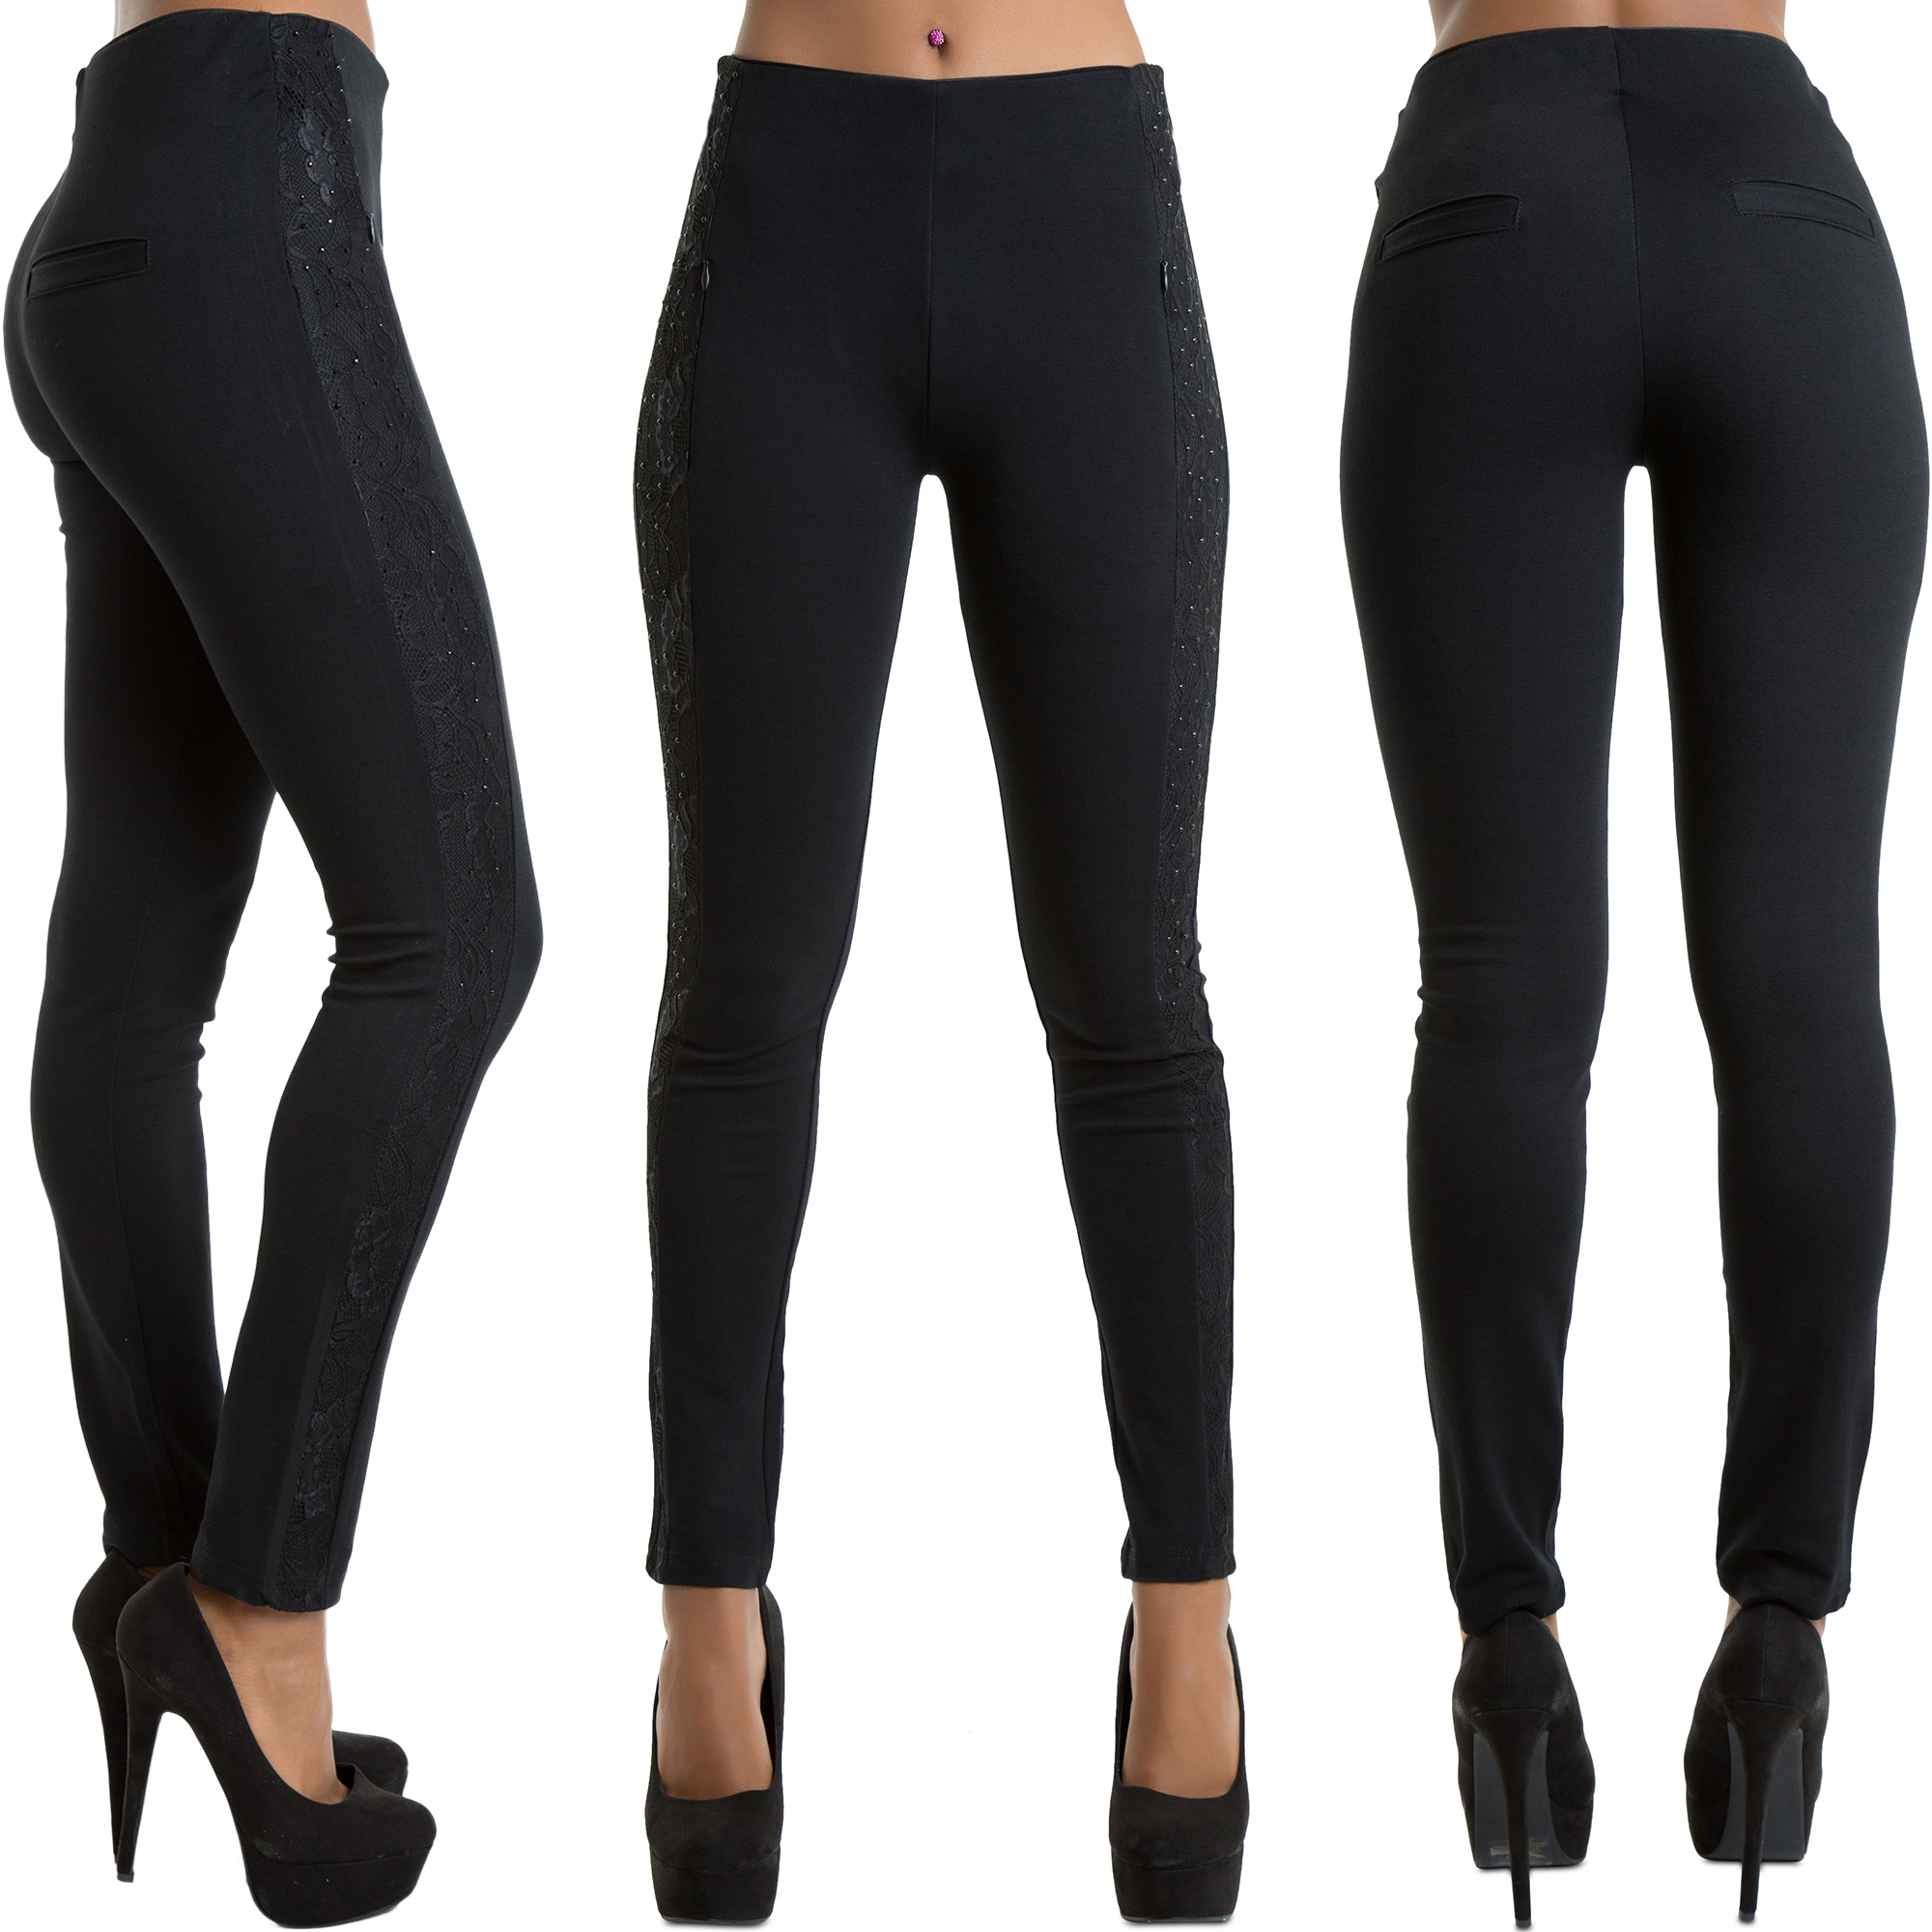 Ladies Women Sexy Black Leggings Trousers With Rose Pattern Size 6 8 10 ...